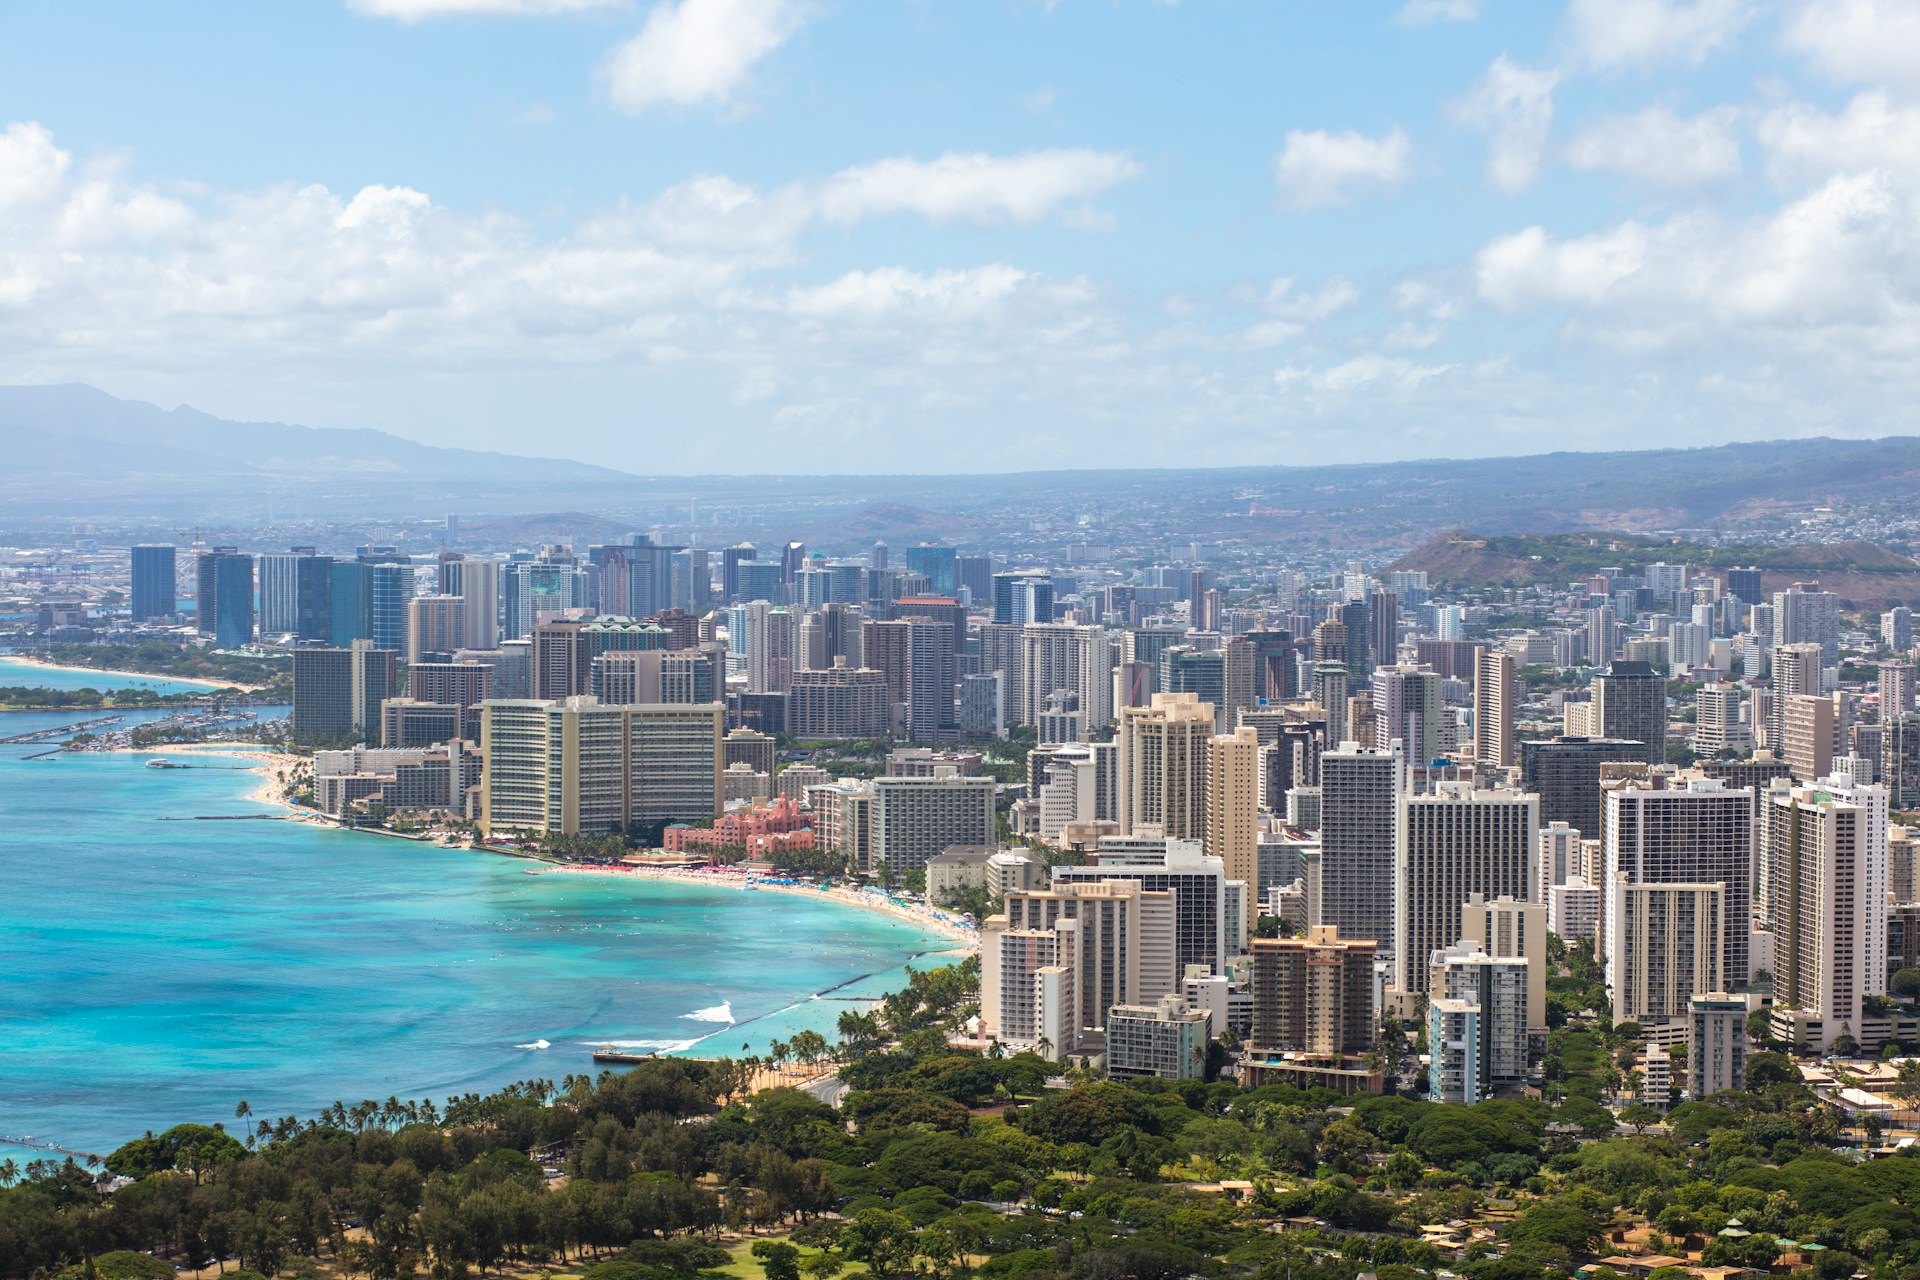 aerial view of the city of Honolulu